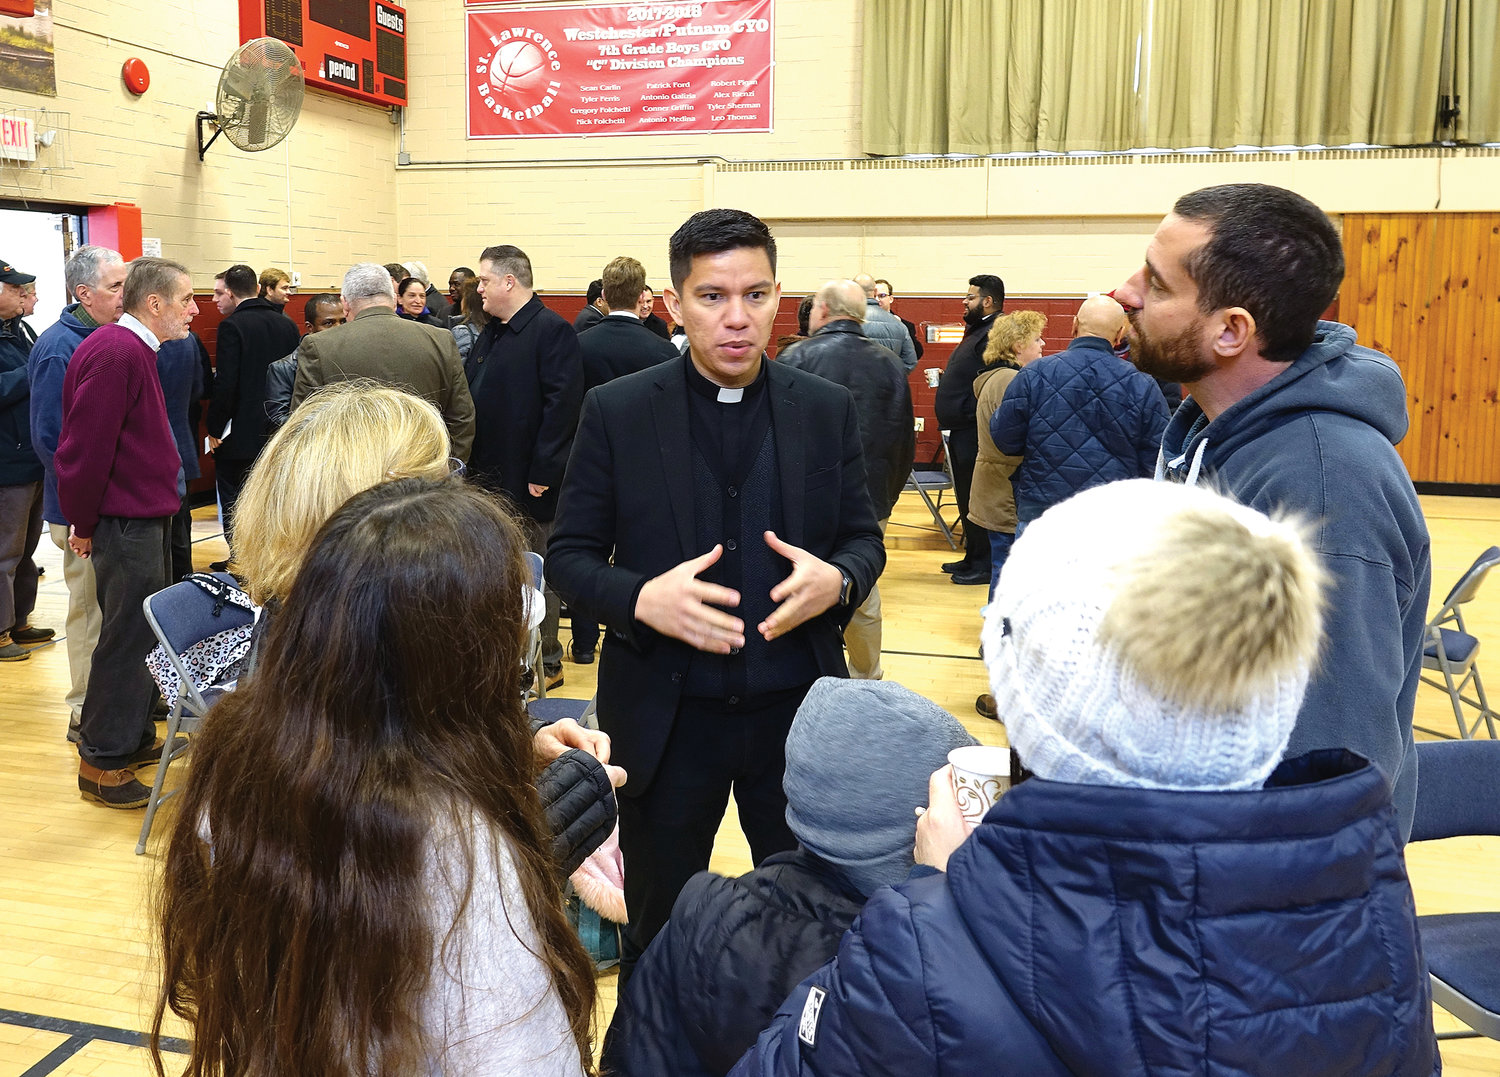 Seminarian Herley Mendez talks with parishioners at a meet and greet after Mass in the parish gymnasium.